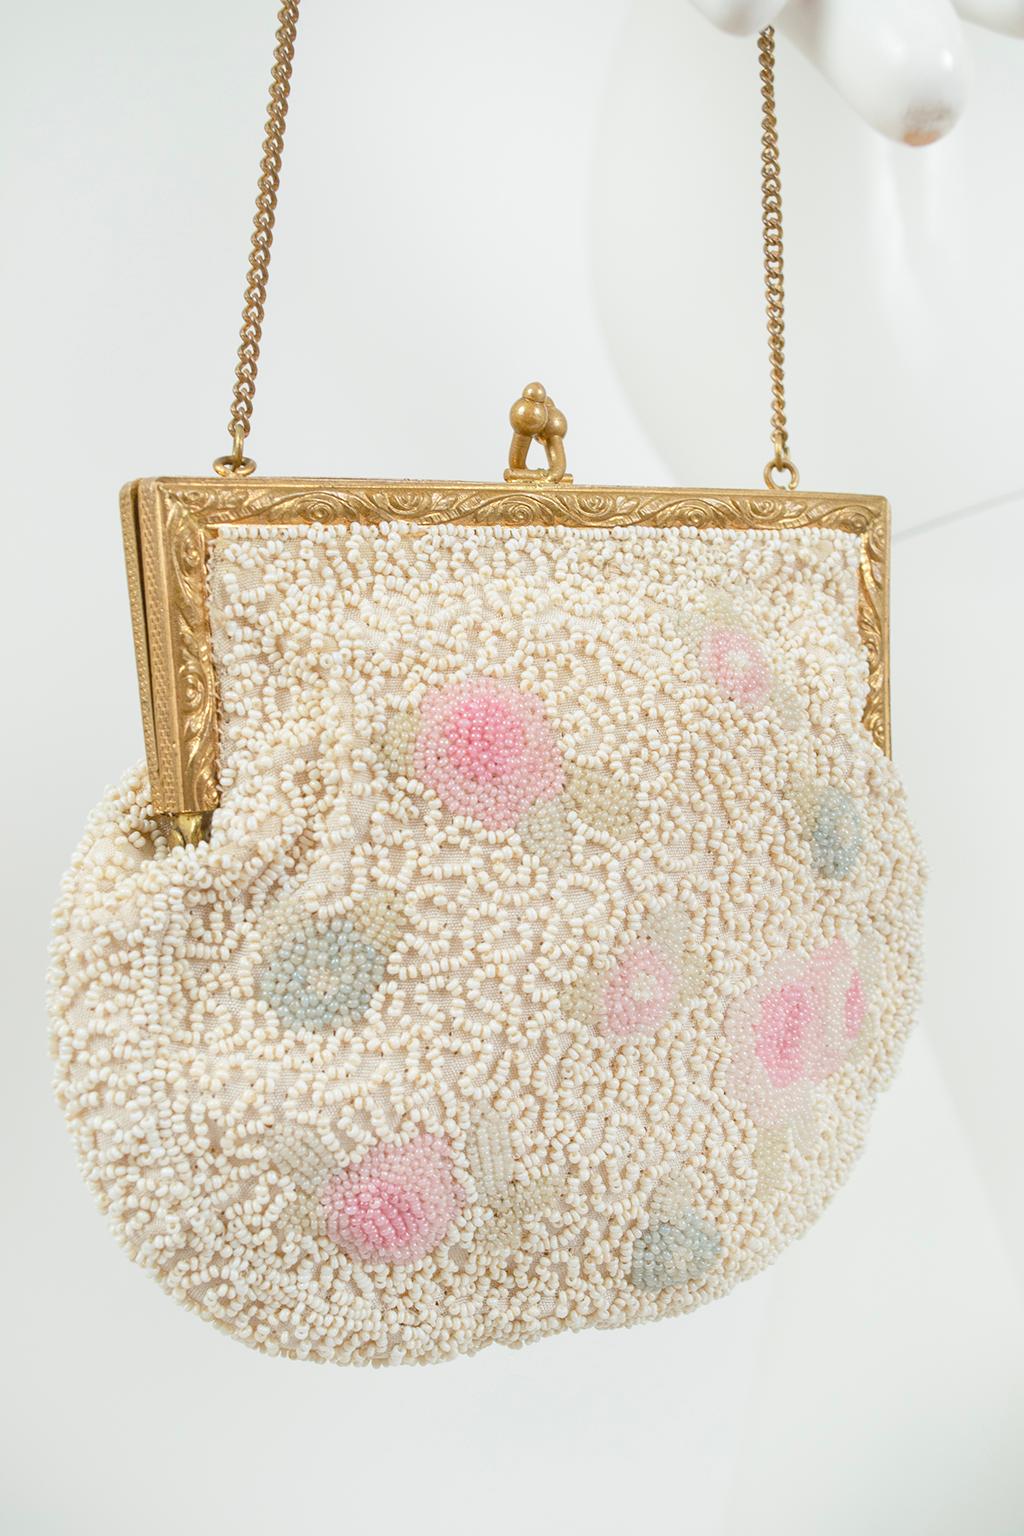 A rare Longchamps--not Longchamp--evening purse made even more noteworthy by its swirling micro bead pattern, punctuated by delicate pink and blue pavé flowers. A diminutive but powerful statement accessory.

Petite chain handle evening bag with